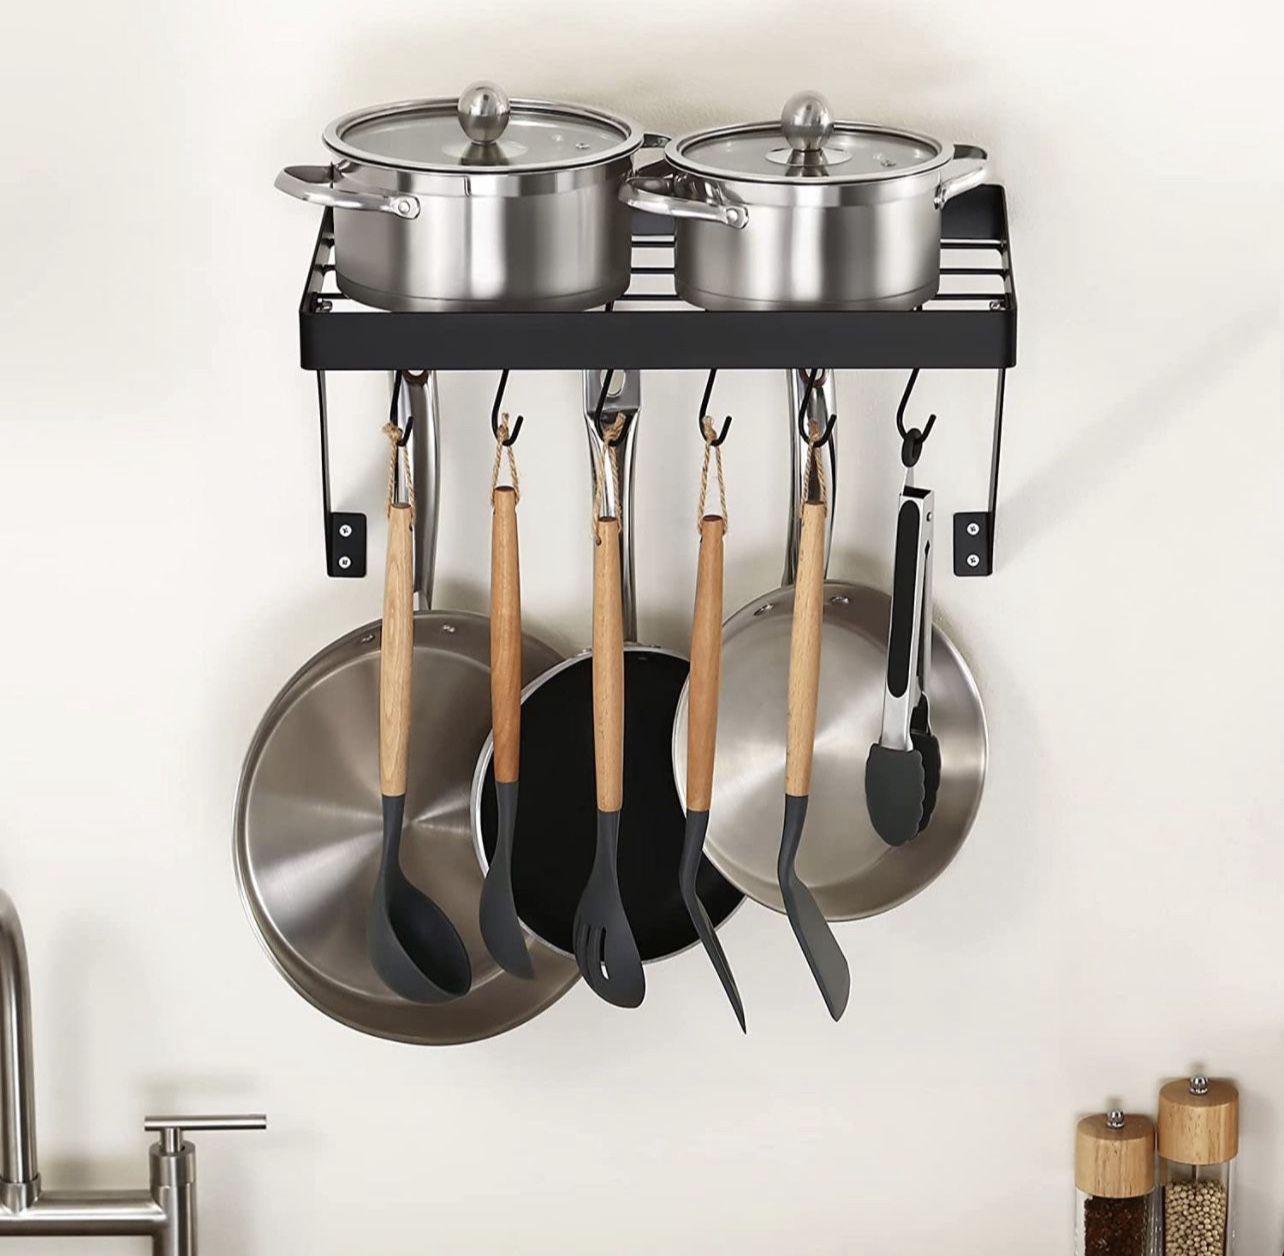 Pot Rack Hanging Wall Mount With 12 Hooks